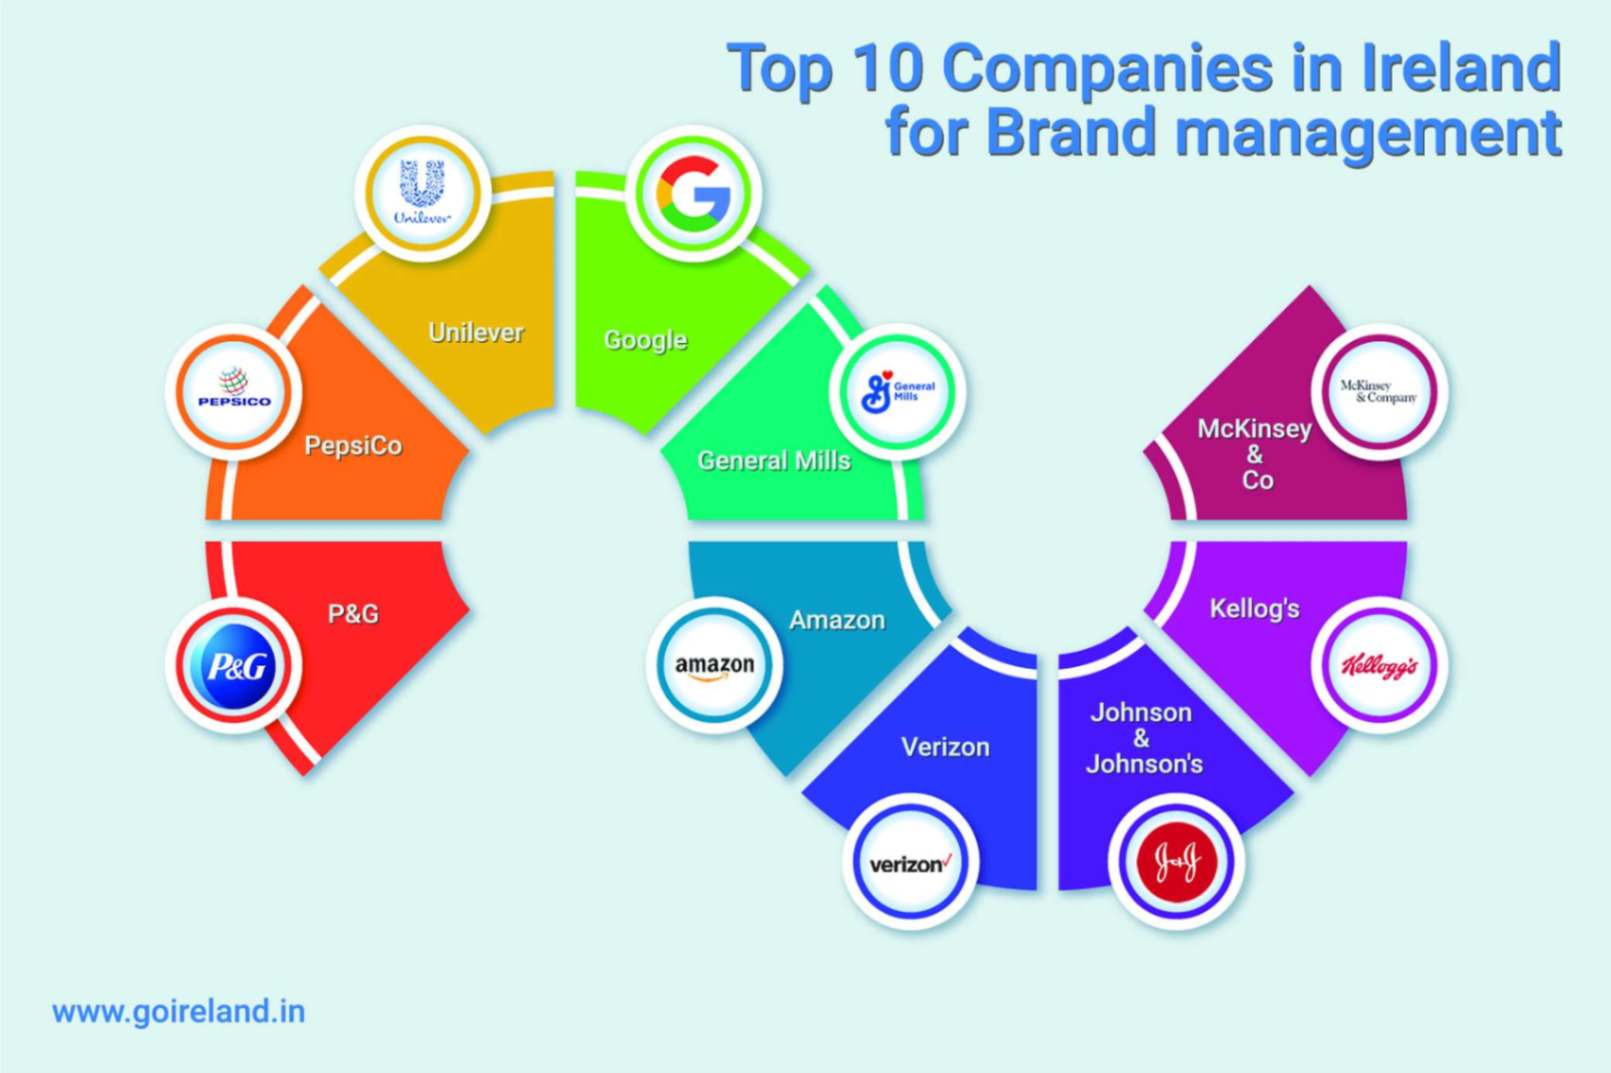 Top 10 Companies in Ireland for Brand Management